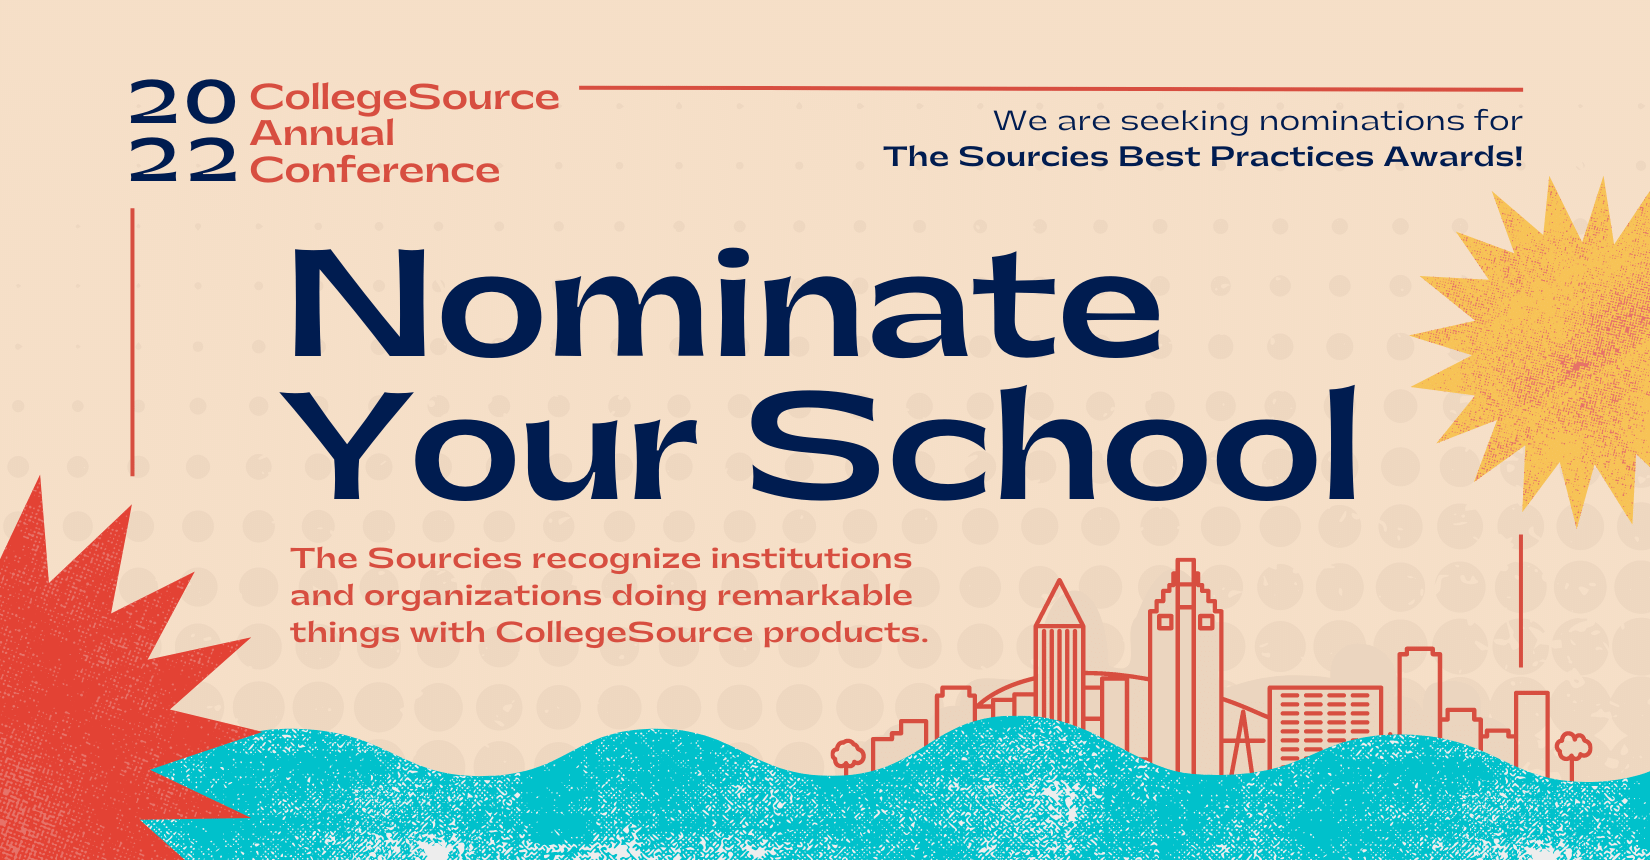 Nominate Your School for a CollegeSource Sourcies Award